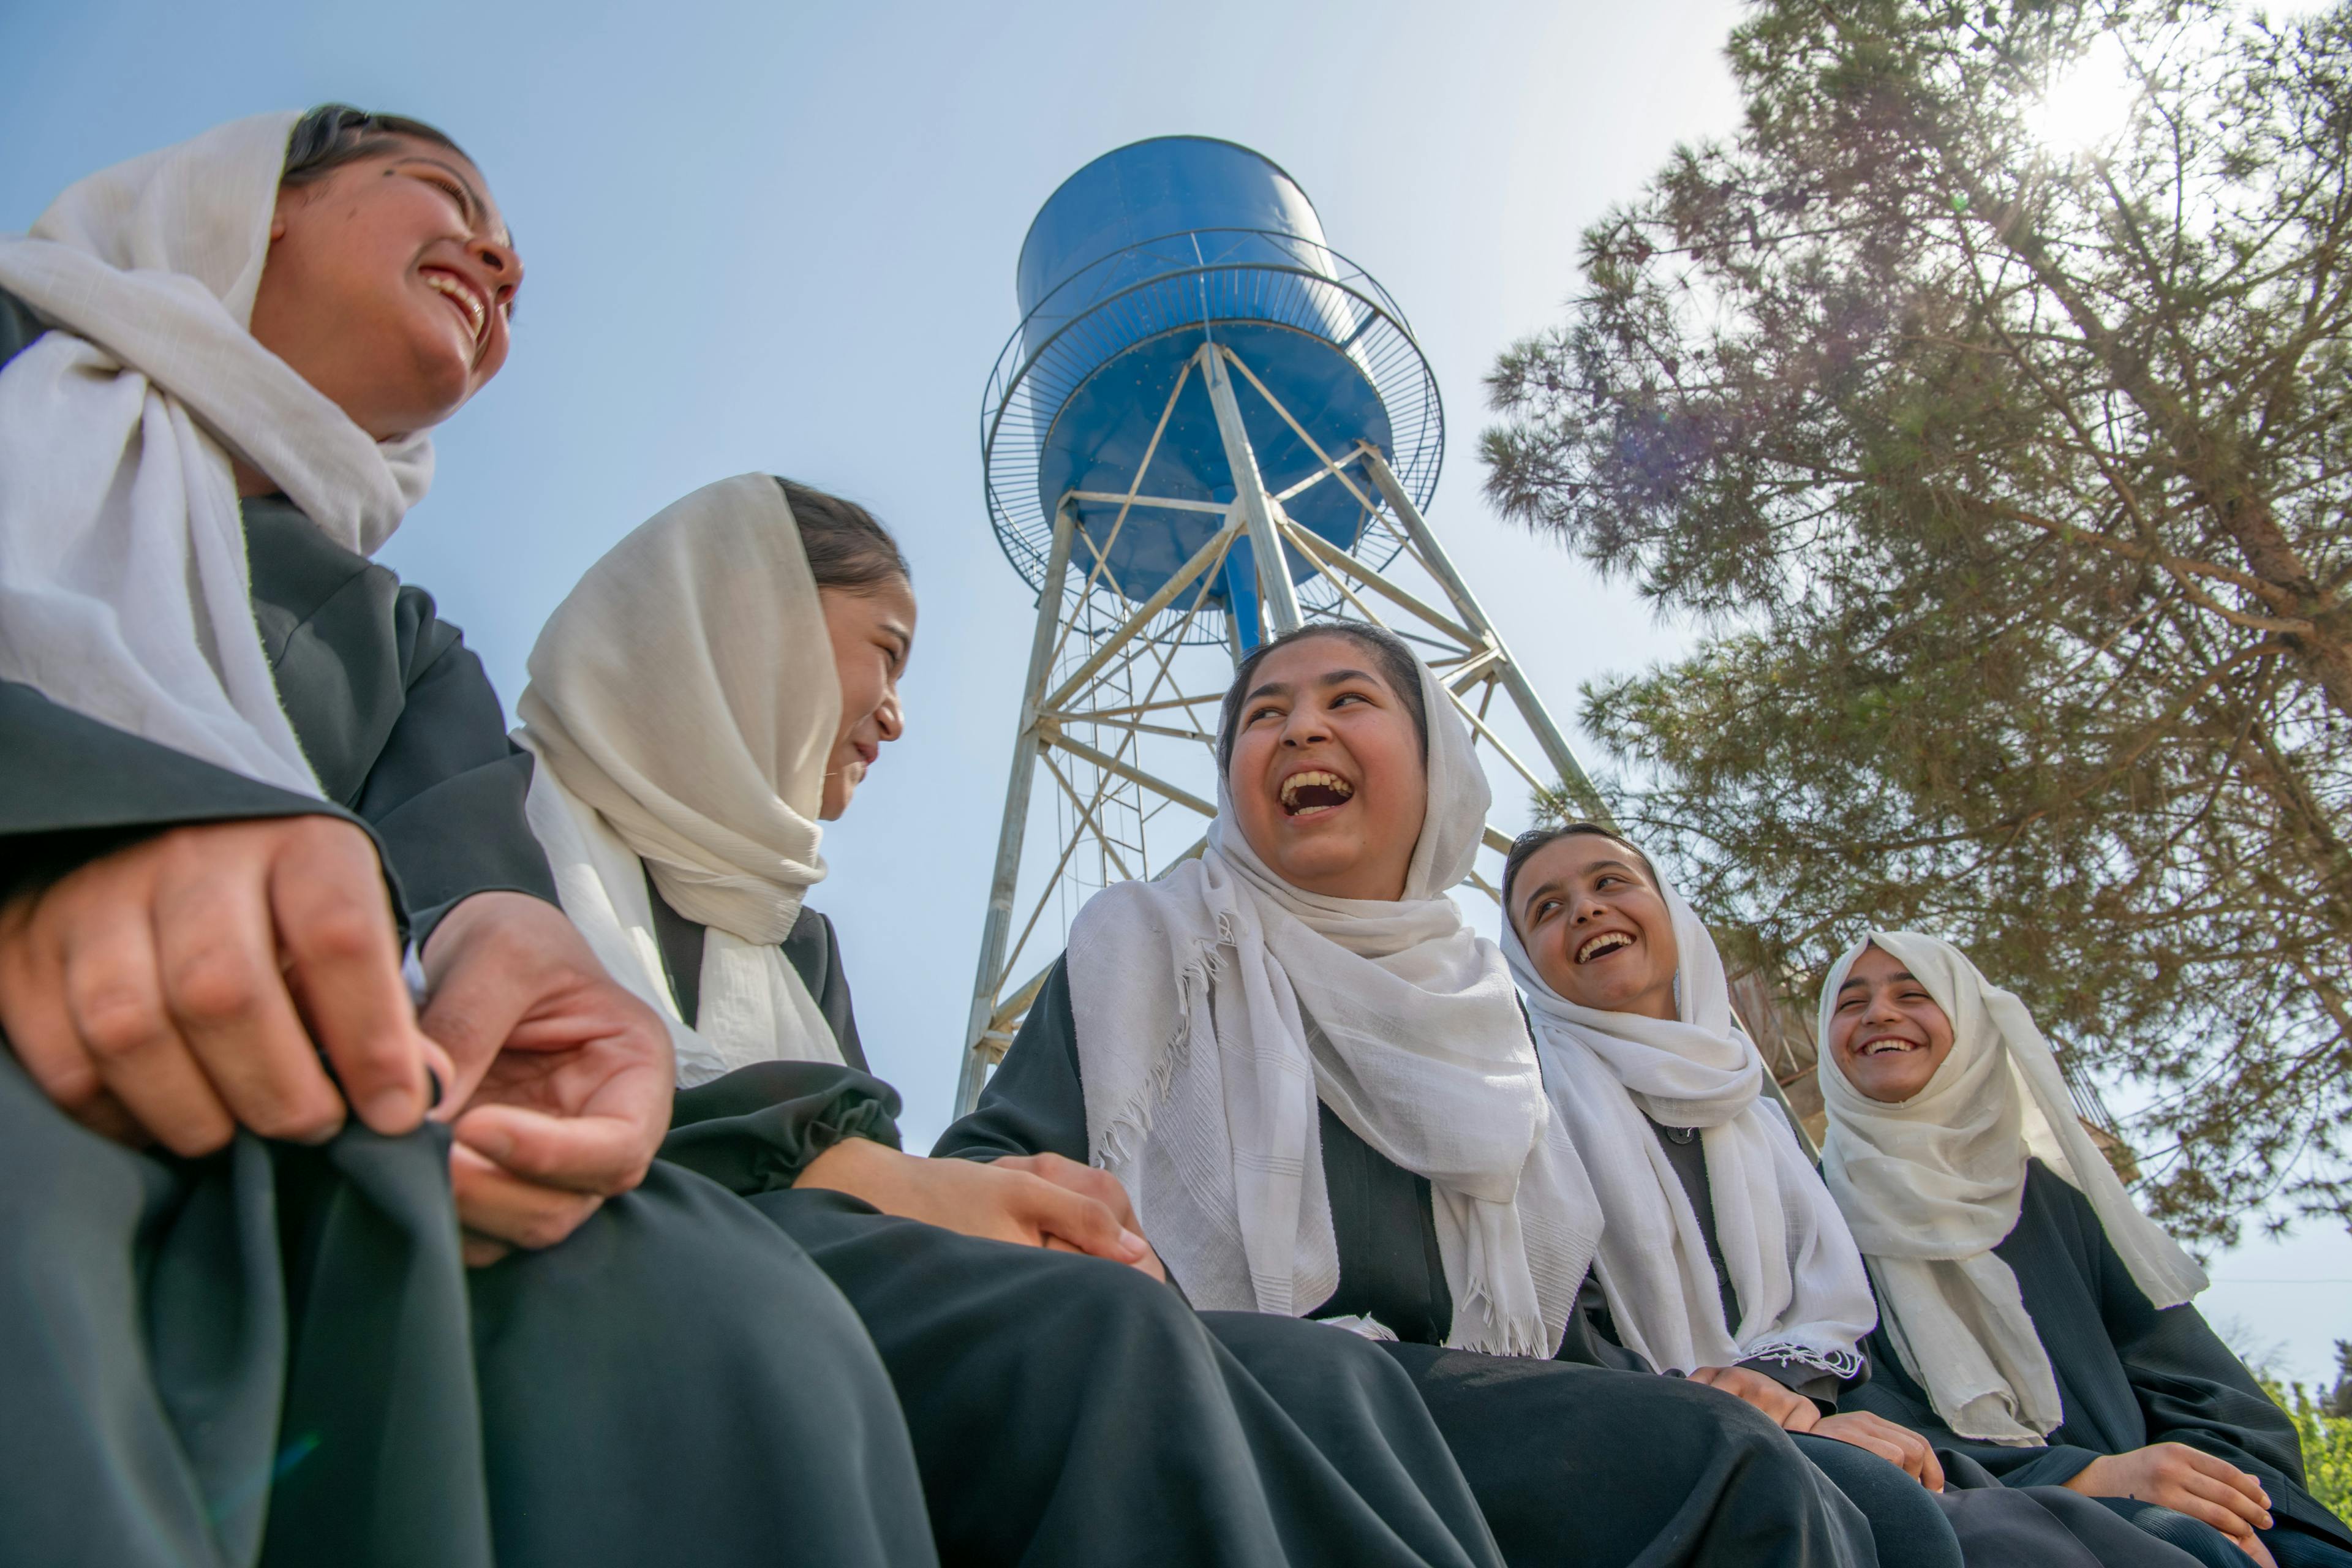 Global parent- A group of students talk and laugh near the UNICEF-installed water tank at Mawlana Jalaluddin Mohammad Balkhi School in Mazar-i-Sharīf, Balkh Province, Afghanistan. 